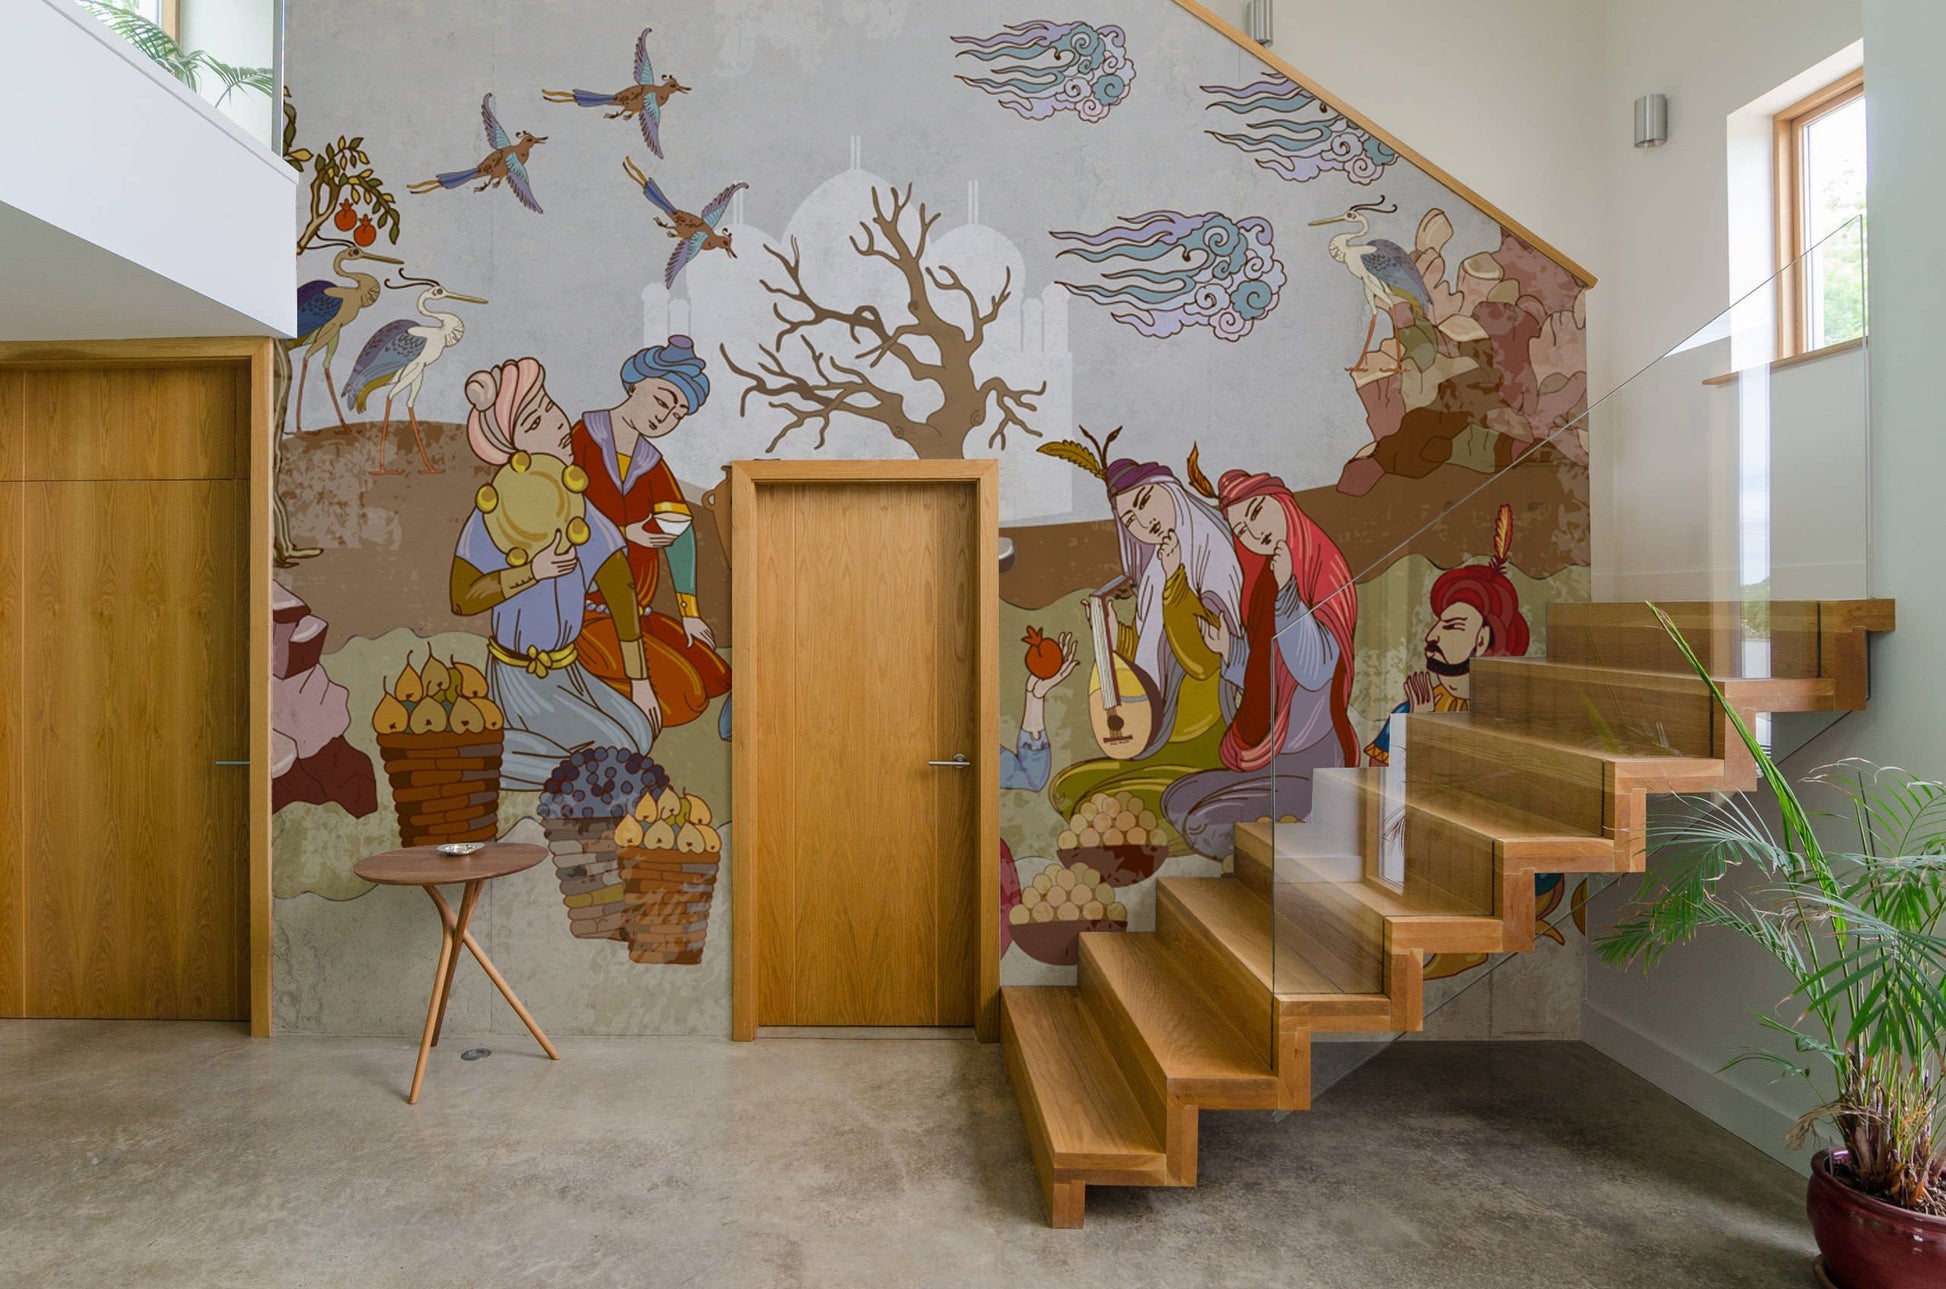 Paintings of Persians Harvest Celebration Wall Murals for Hallway